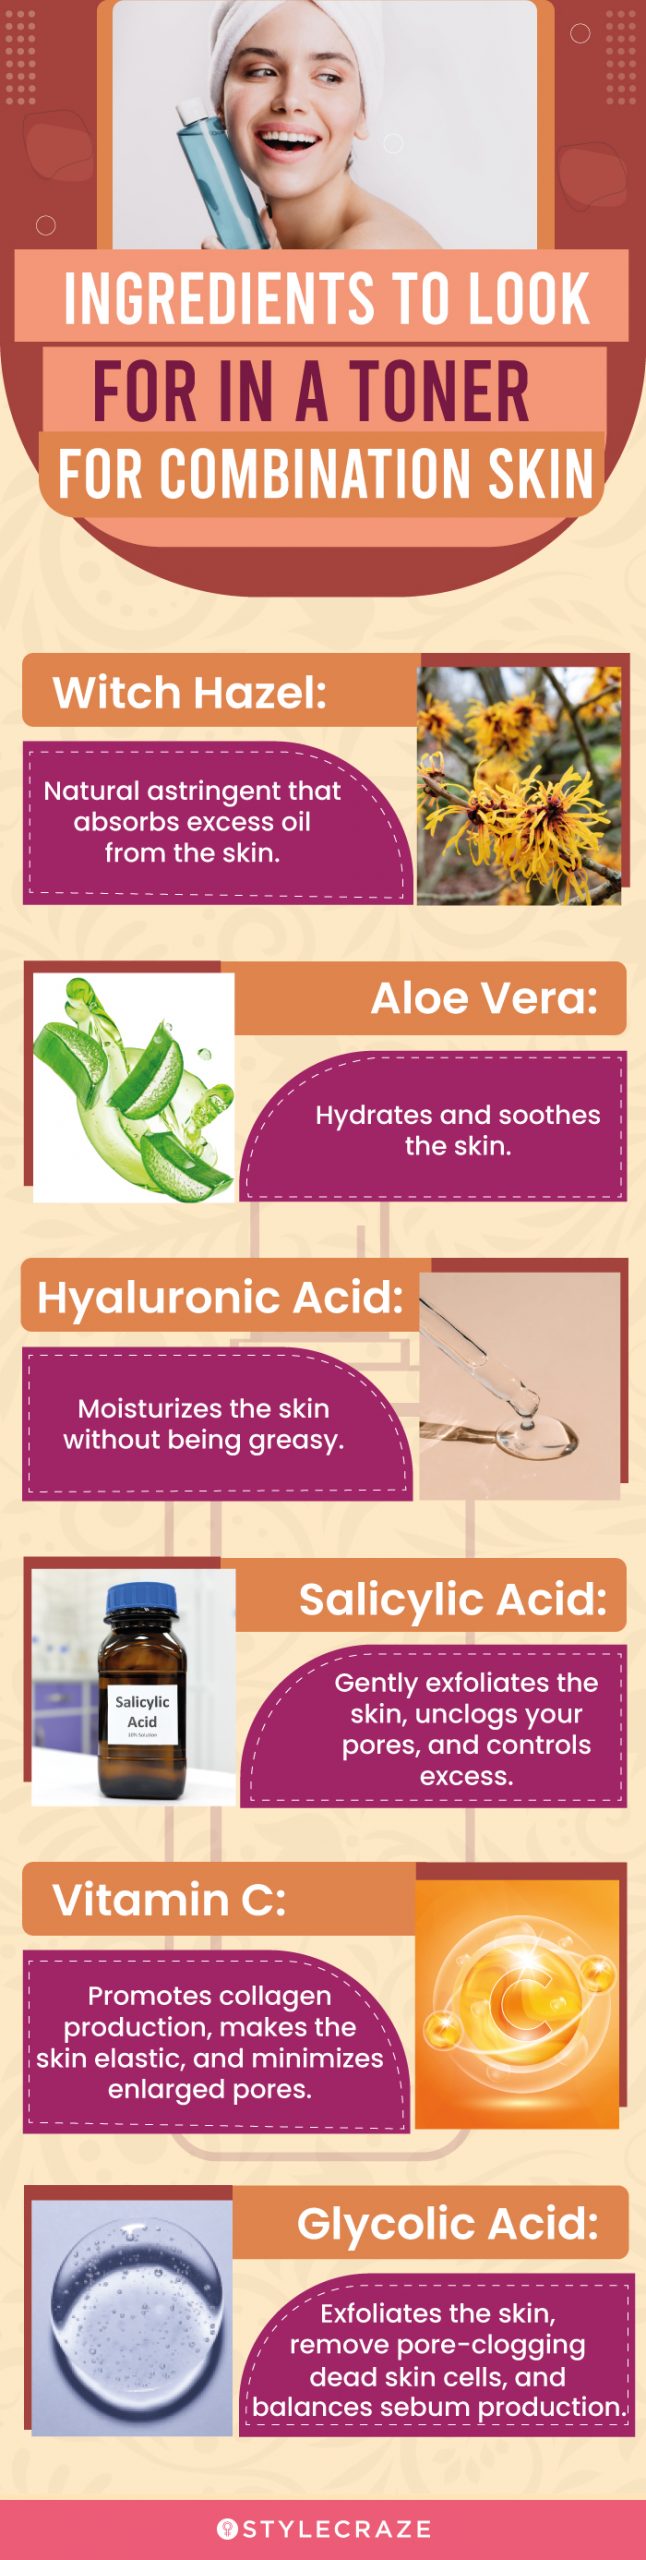 Ingredients To Look For In A Toner For Combination Skin (infographic)